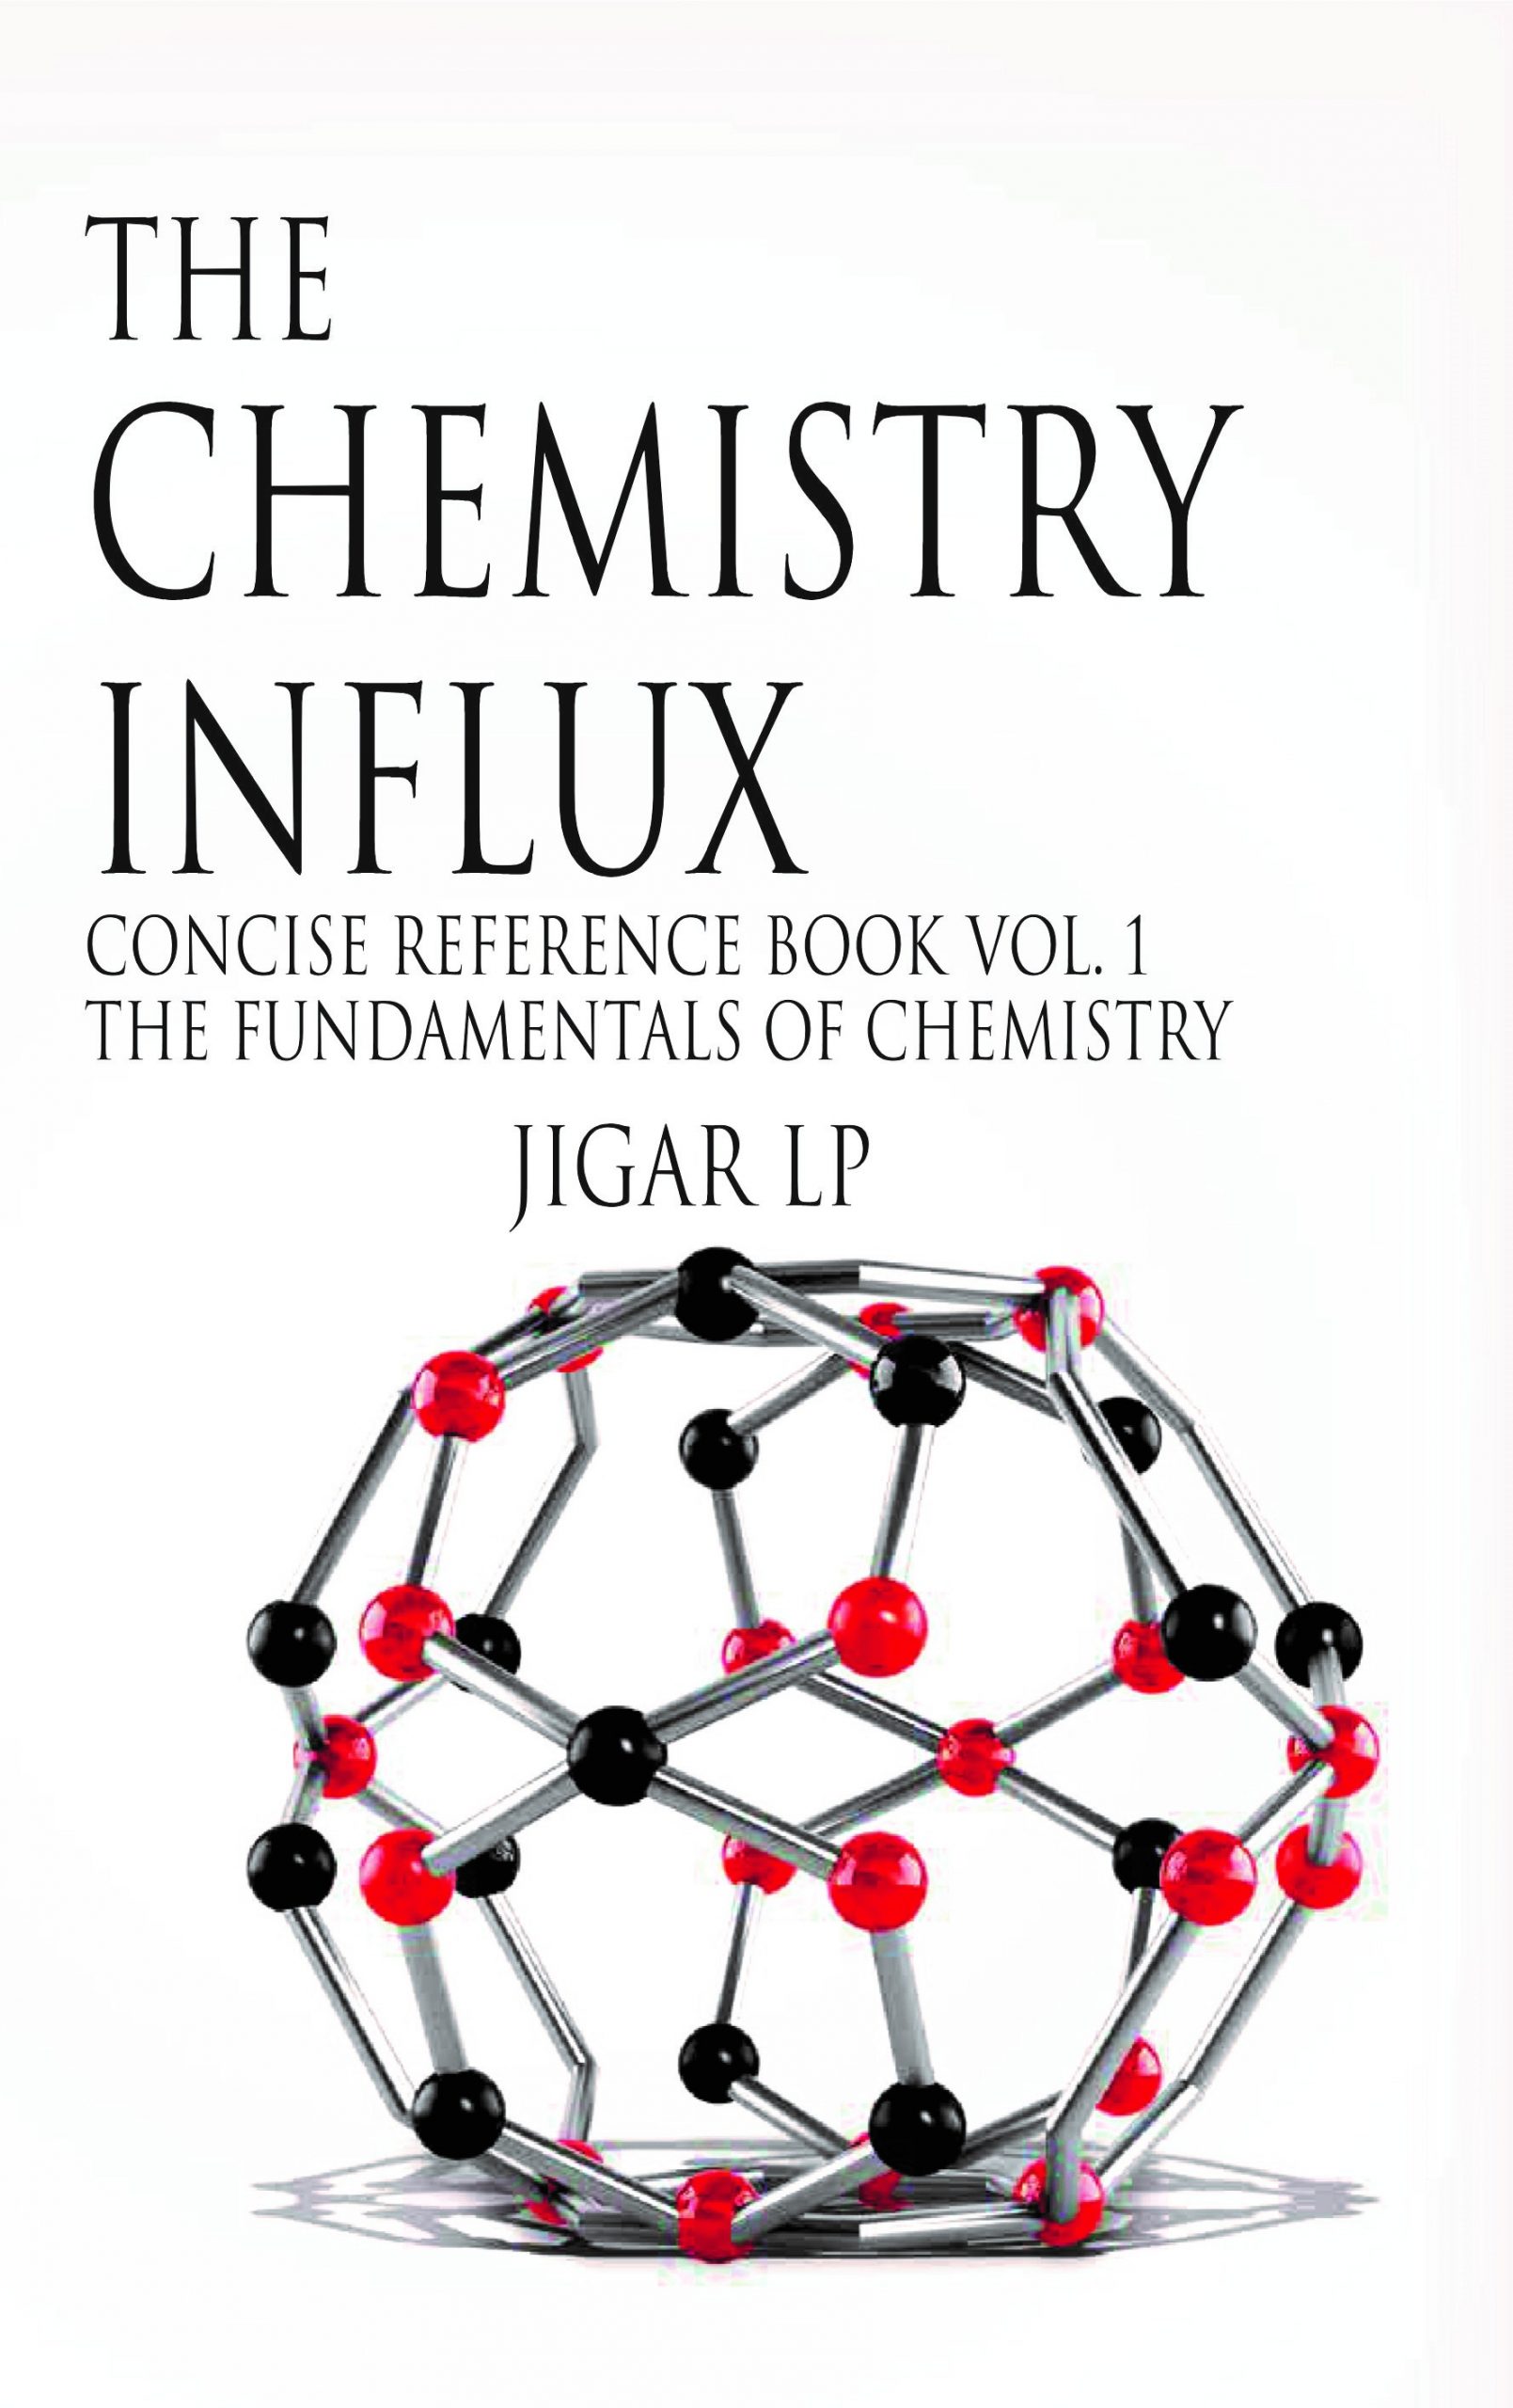 The Chemistry Influx Concise Reference Book Vol. 1 The fundamentals of Chemistry